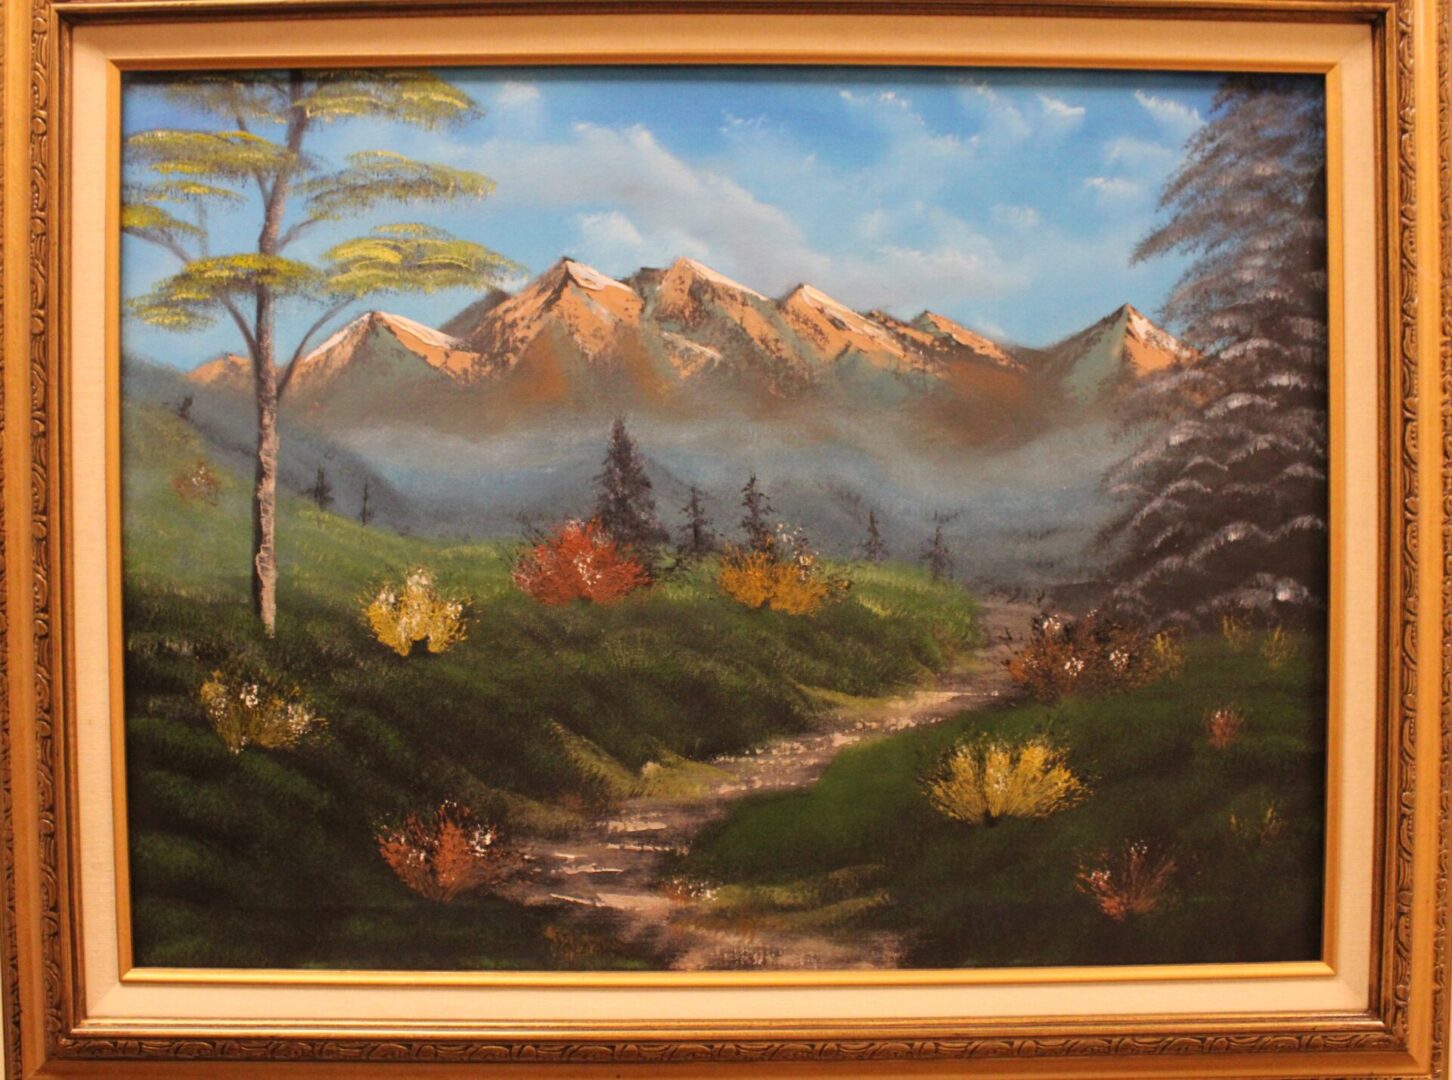 Painting of a mountain scenery with a orange frame